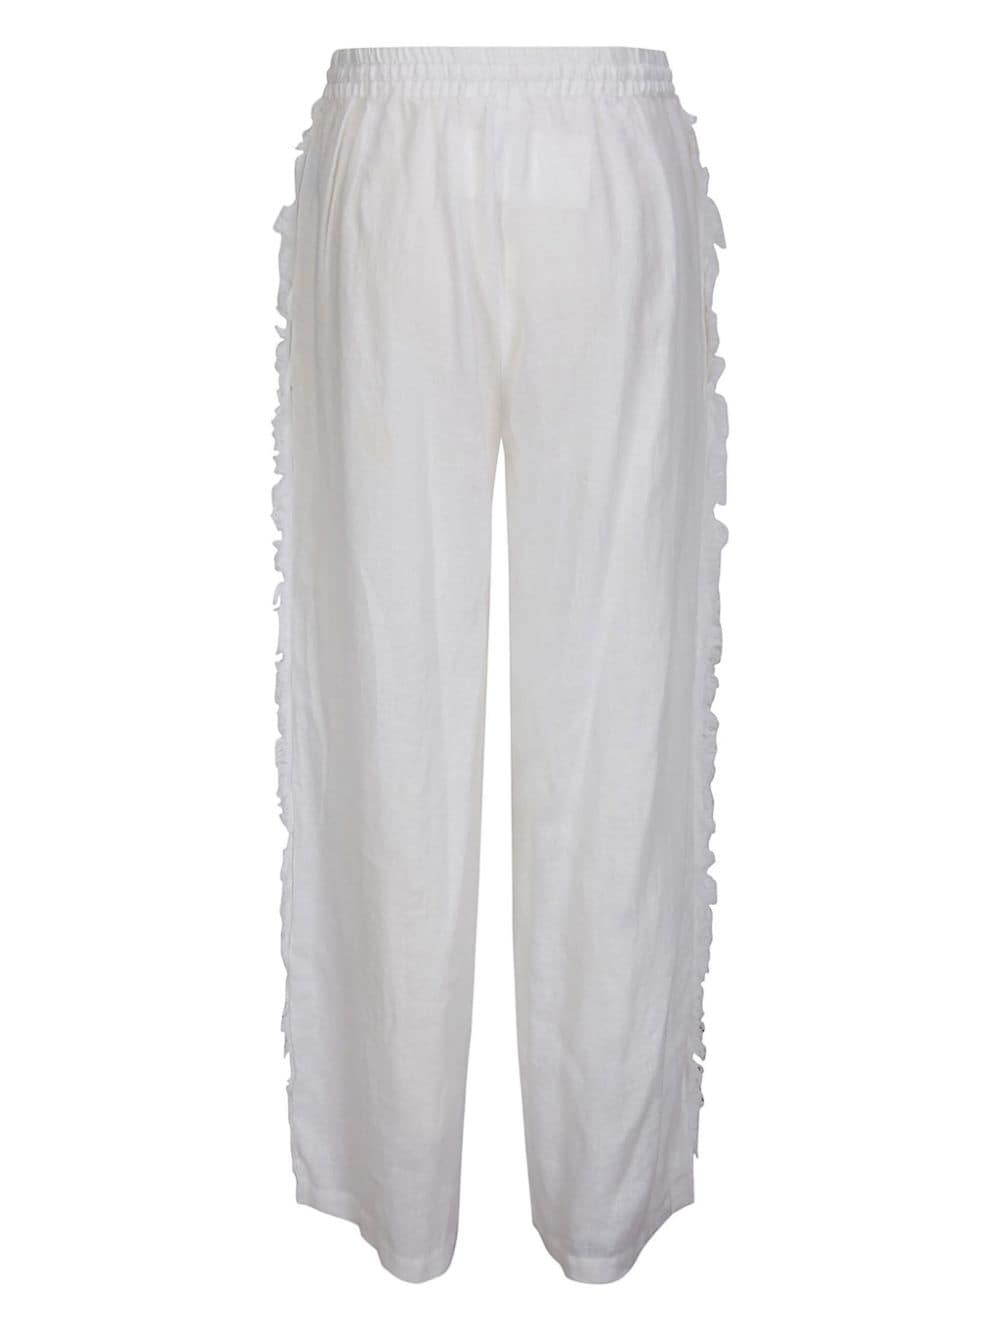 P.A.R.O.S.H. frayed linen trousers - Wit